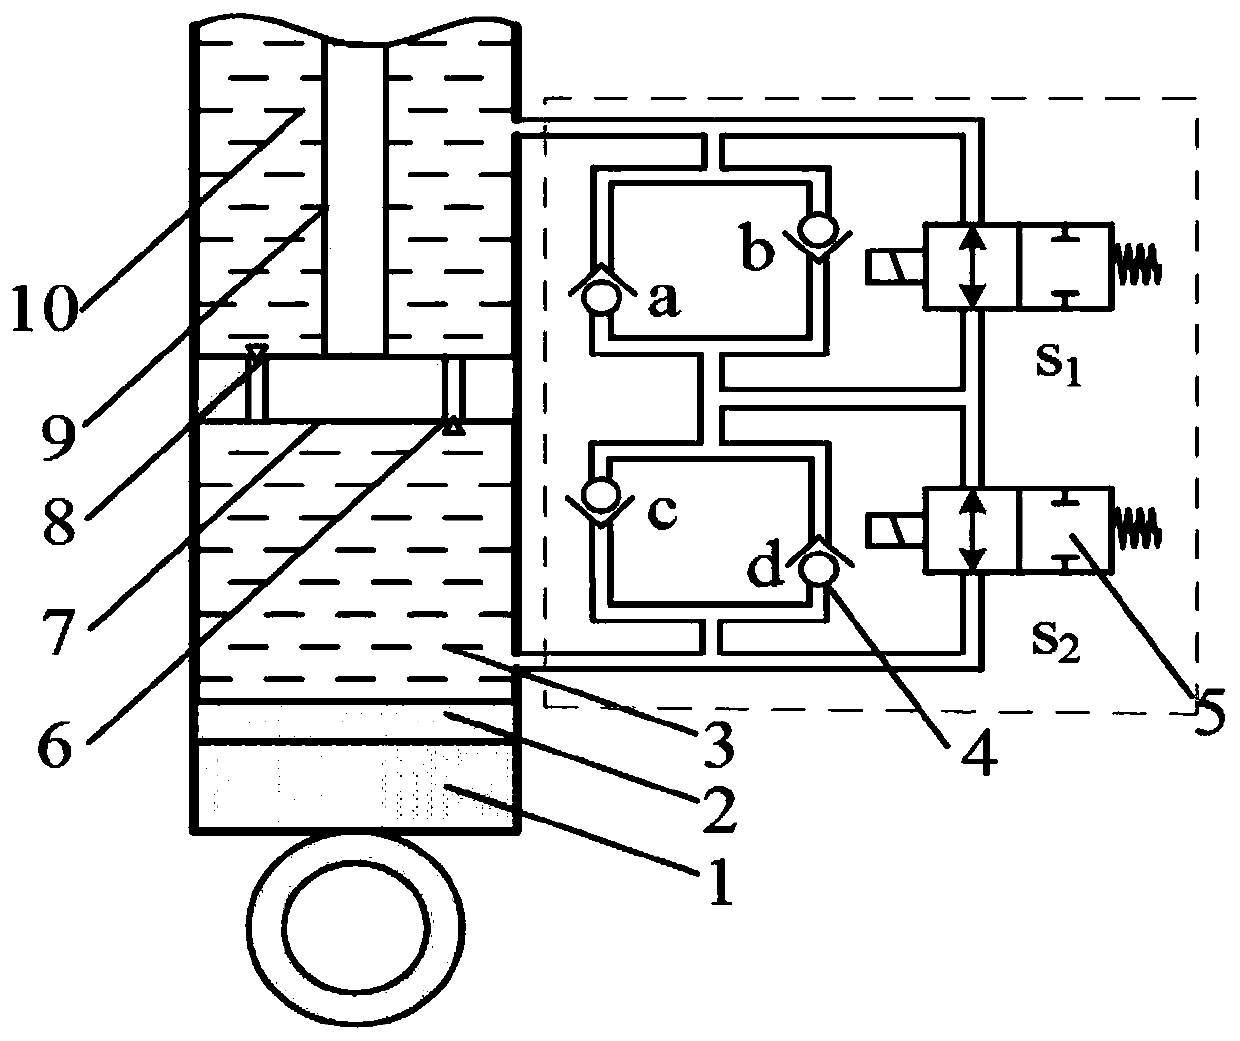 Fuzzy switching control method for electric control system for damping multi-mode semi-active suspension